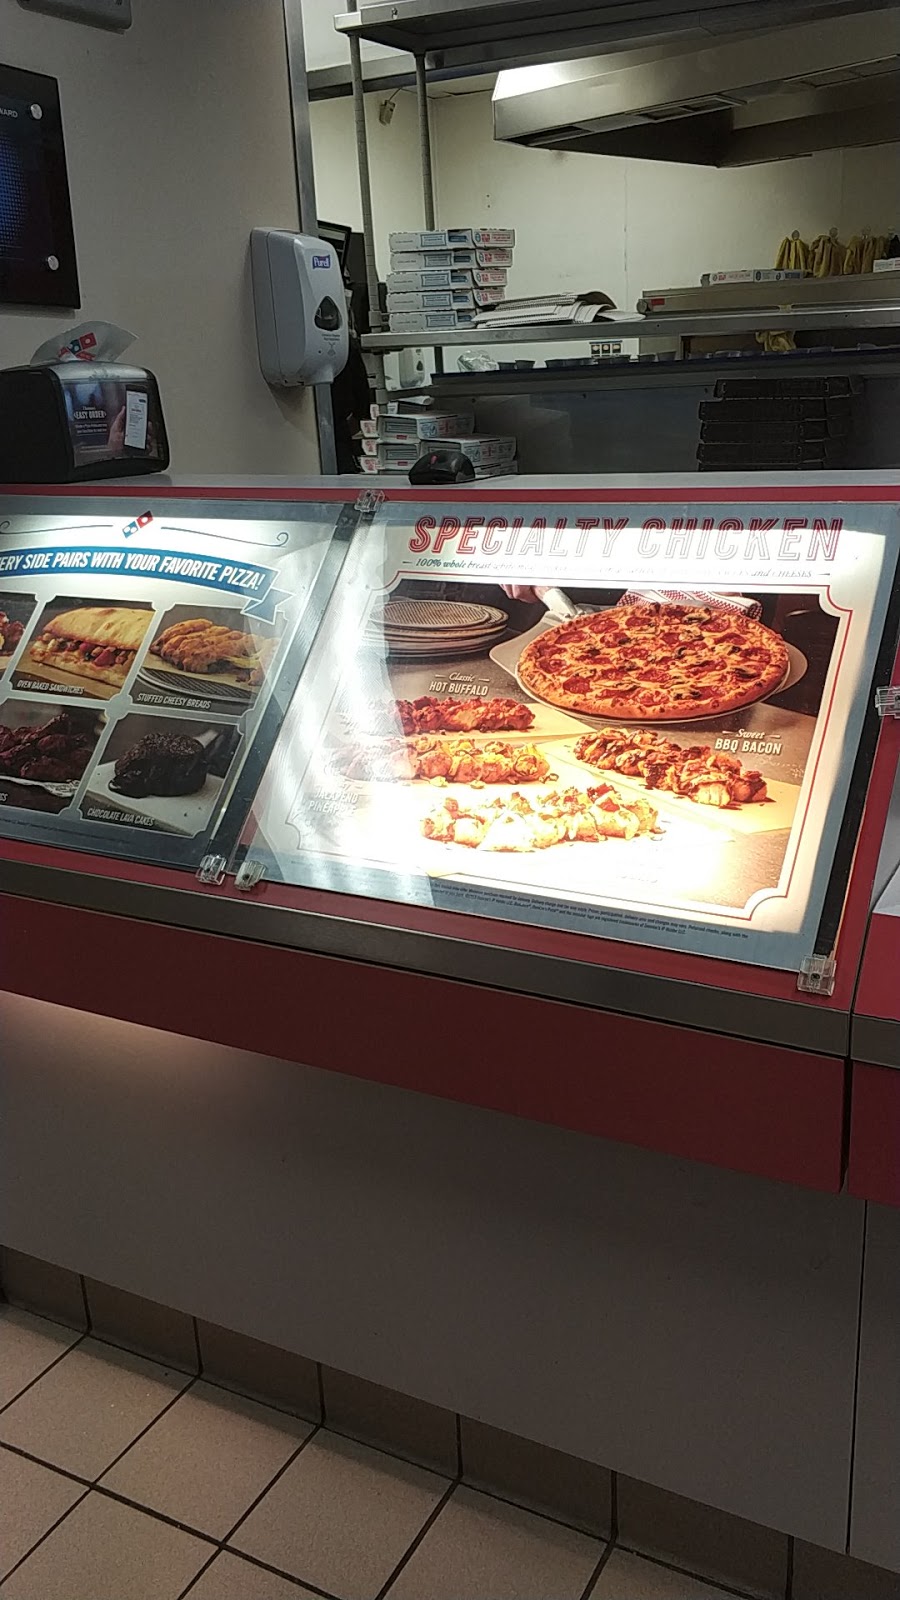 Dominos Pizza | 155 Levittown Pkwy, Hicksville, NY 11801 | Phone: (516) 822-0030